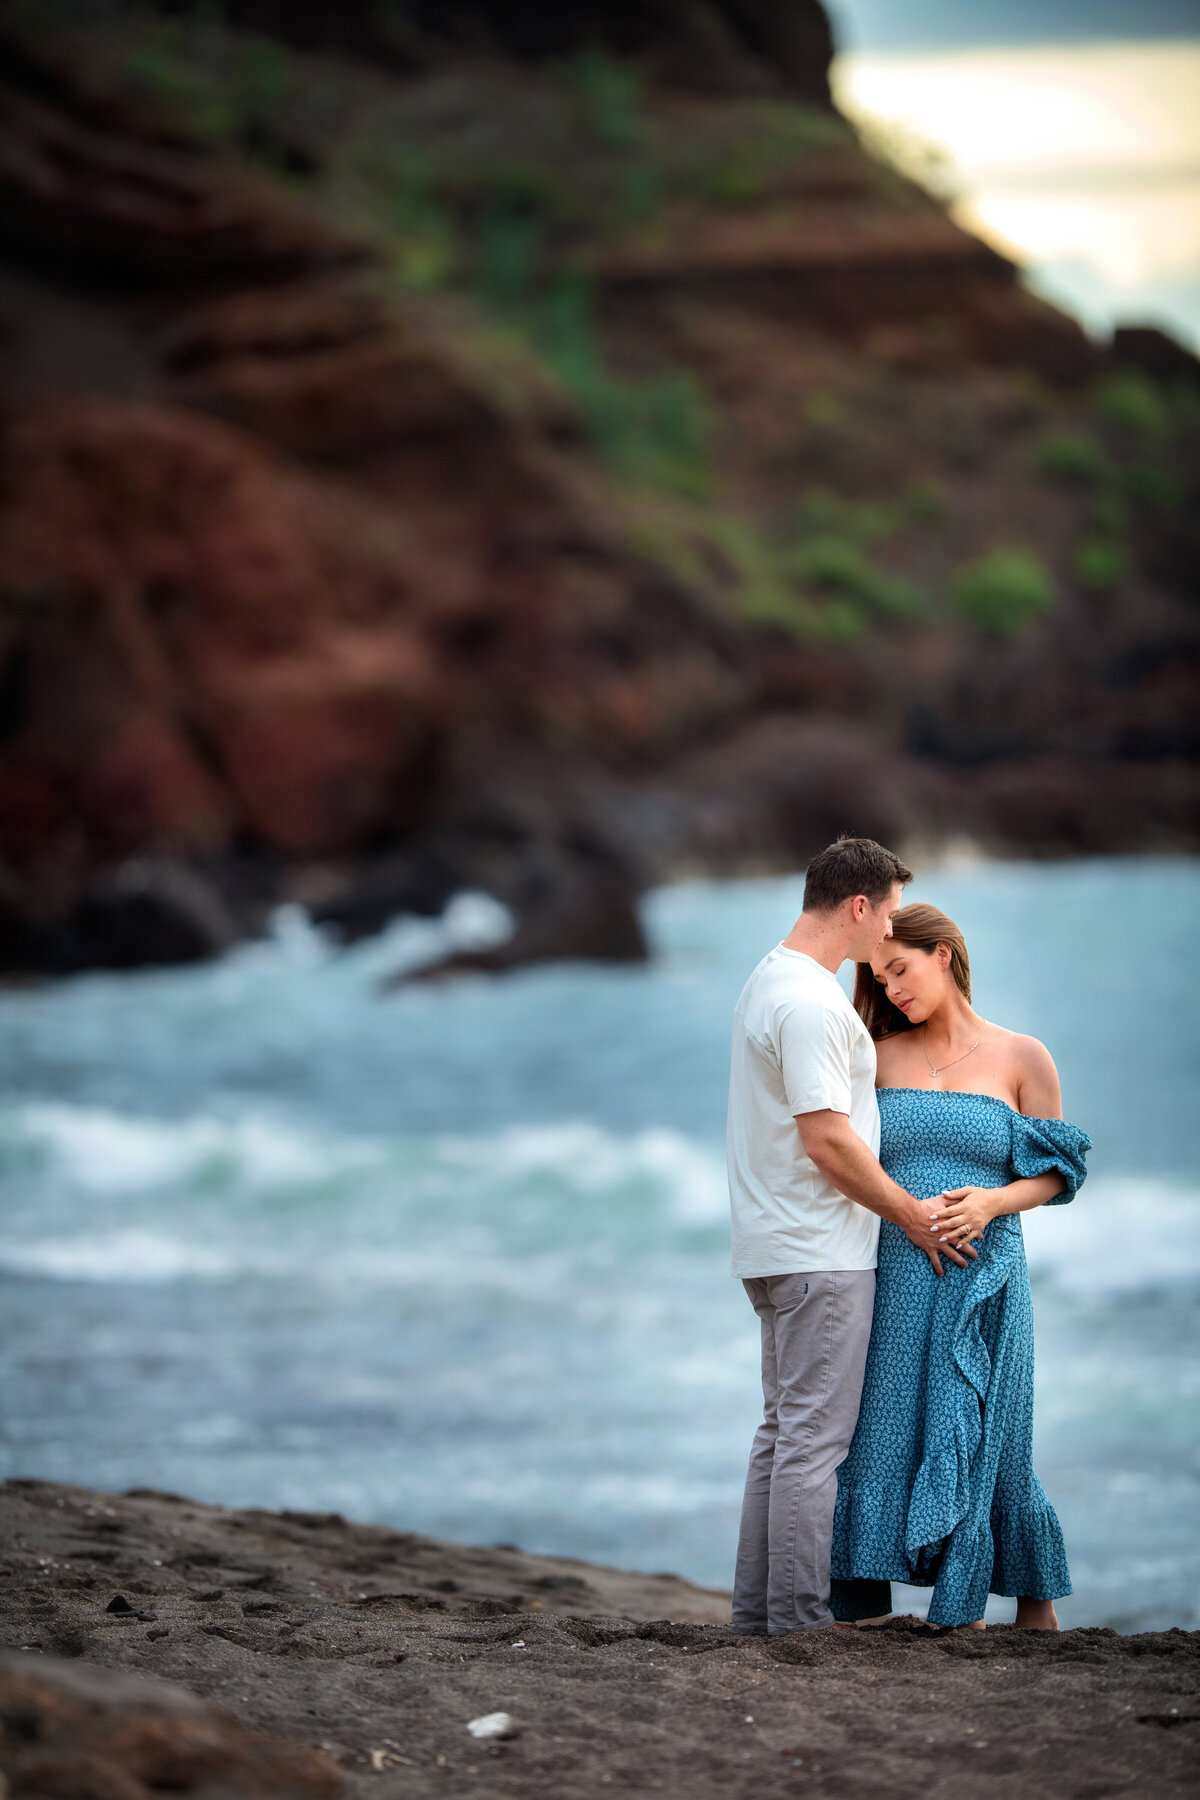 Maui couple snuggling during maternity photoshoot at the beach